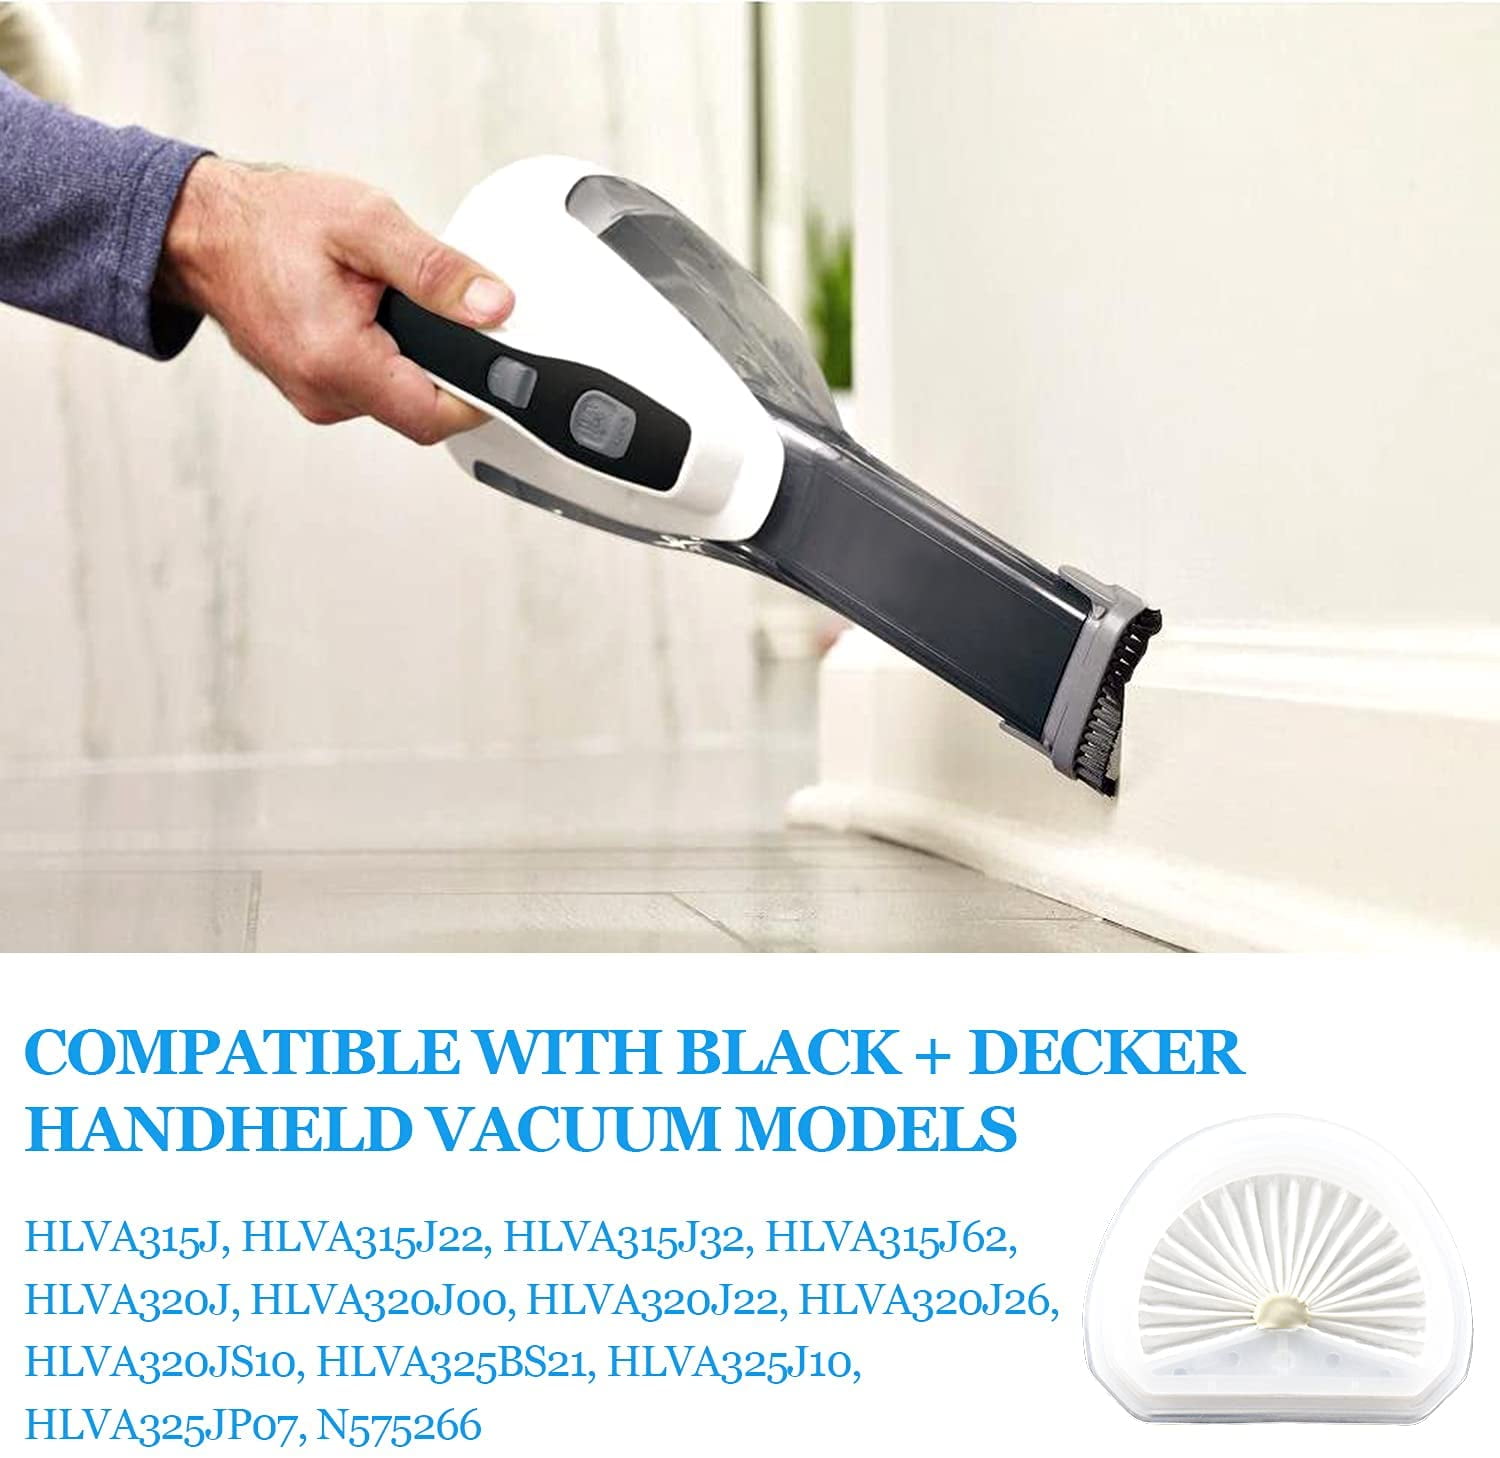 BLACK+DECKER Dustbuster Handheld Vacuum, Cordless, Chili Red with  Replacement Filter (HLVA320J26 & VLPF10)